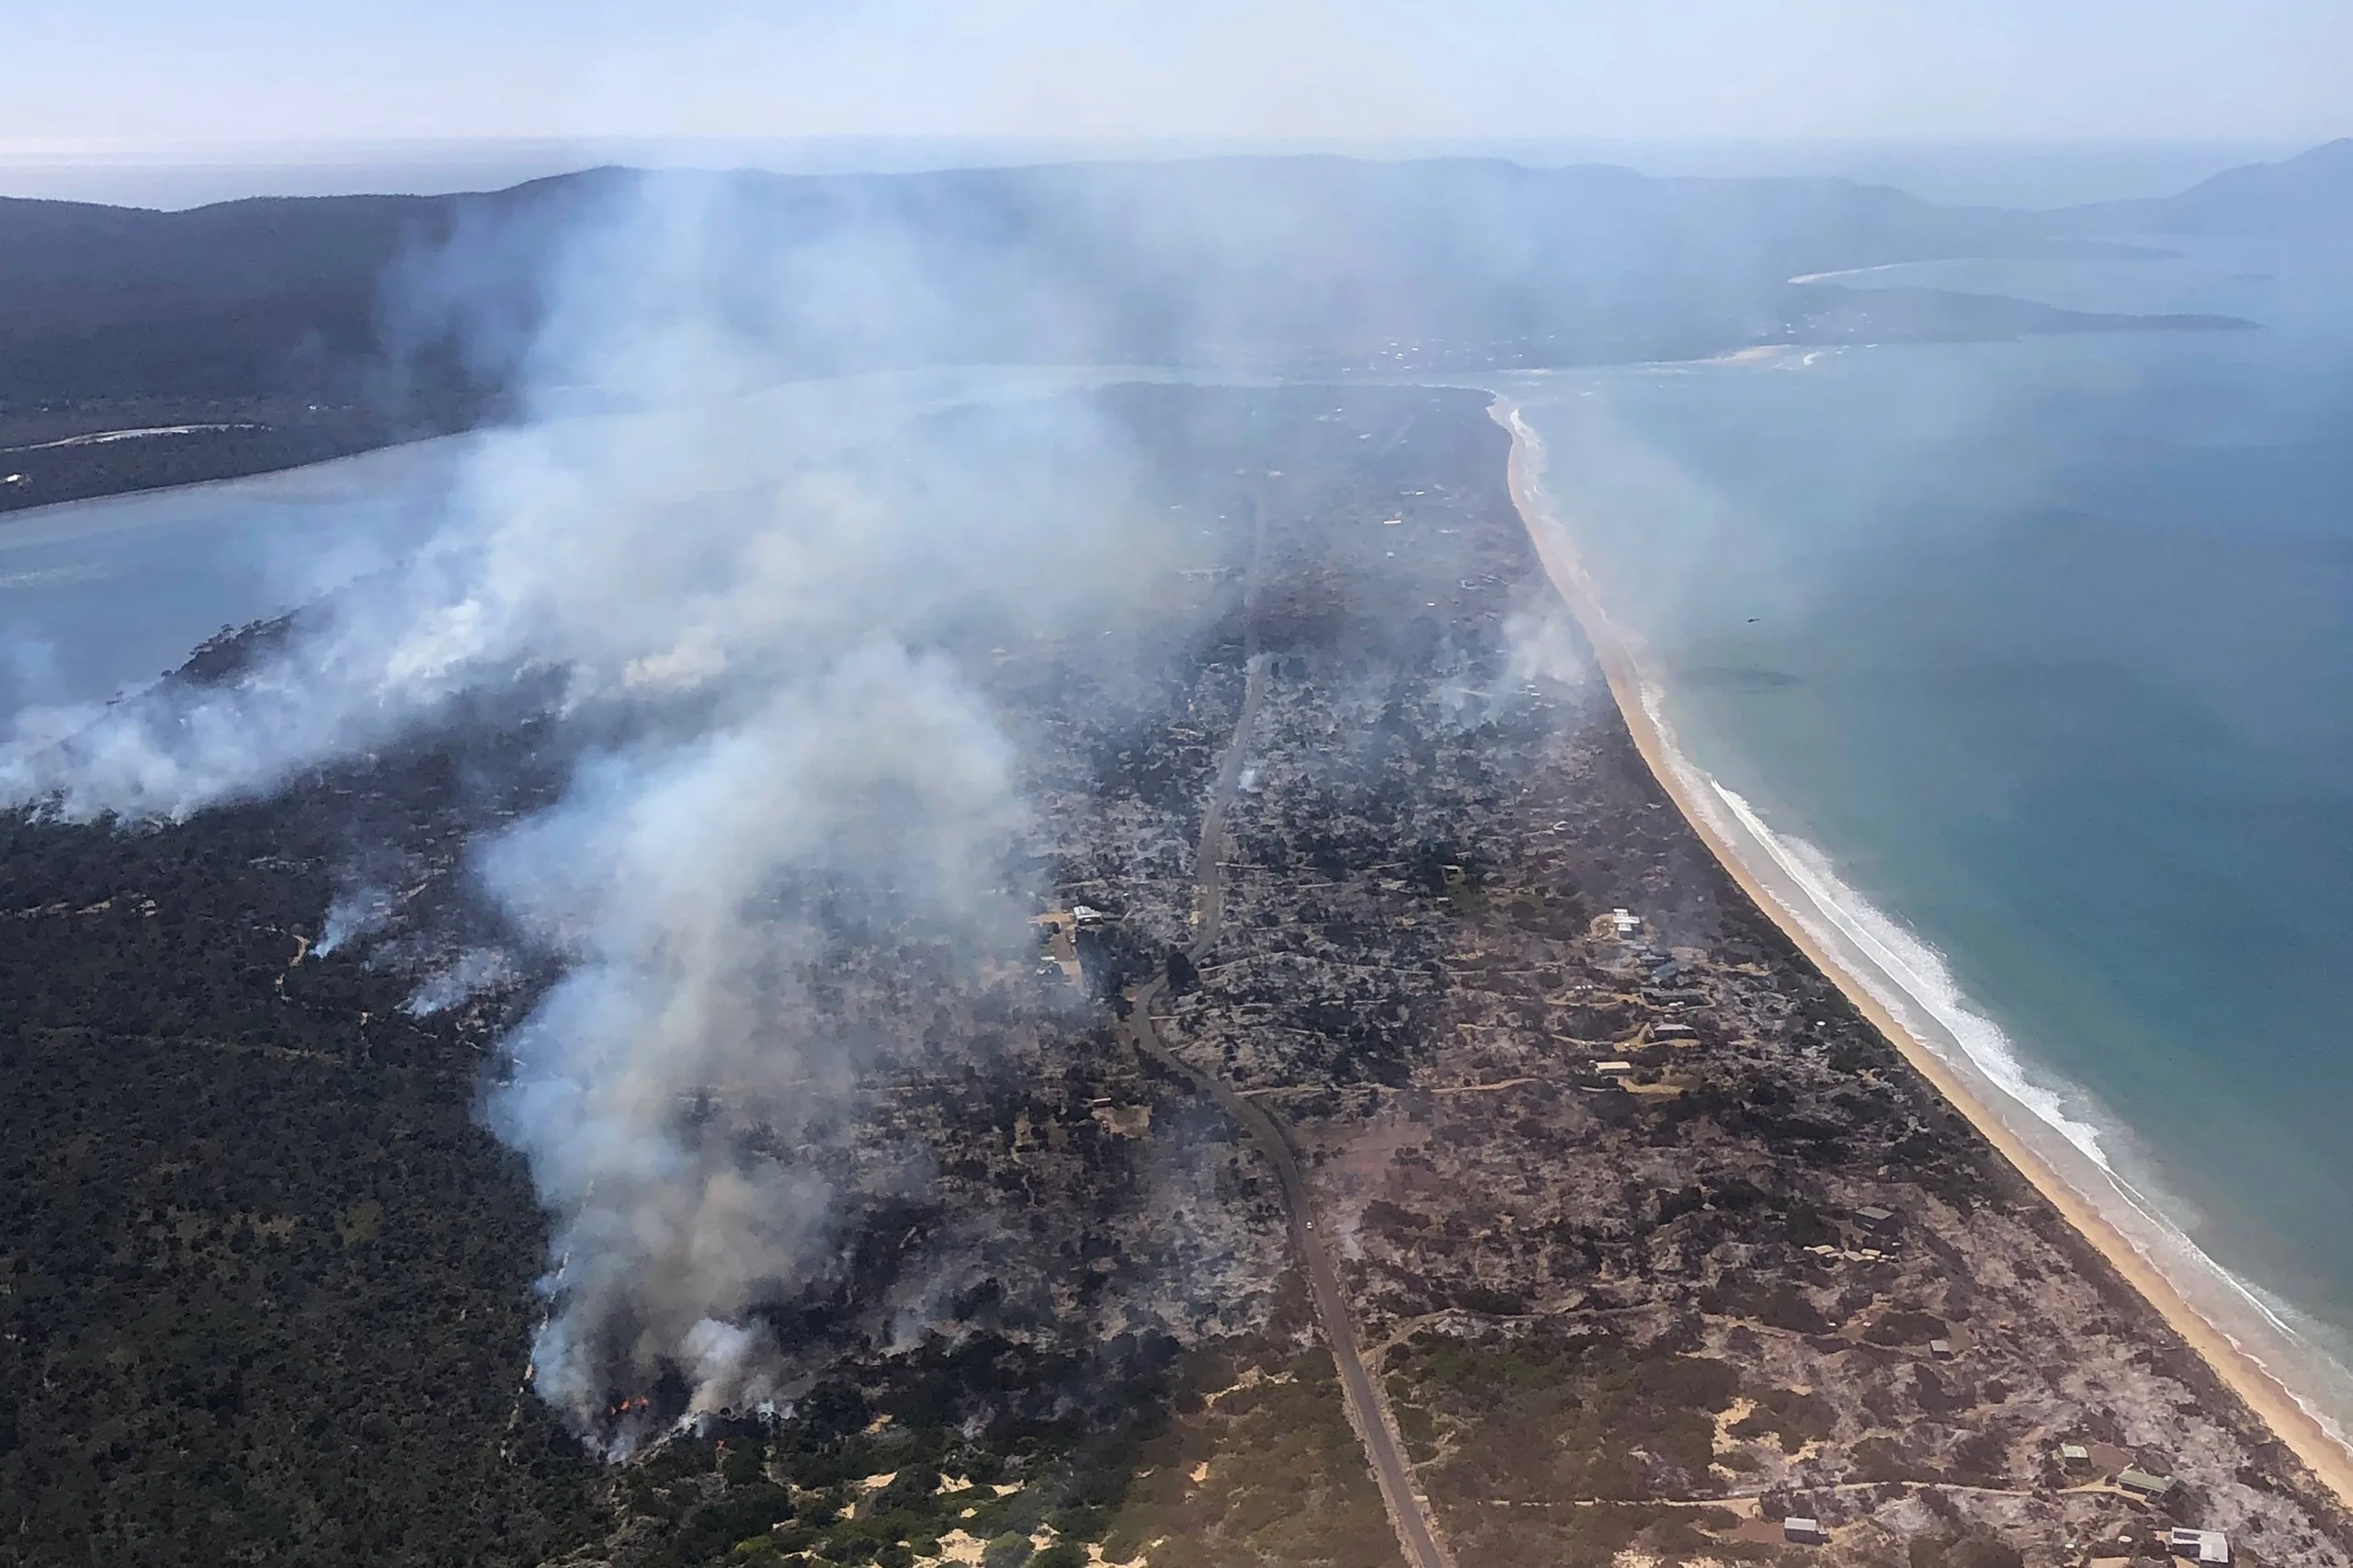 Emergency warning for fire at Tasmanian Dolphin Sands reissued